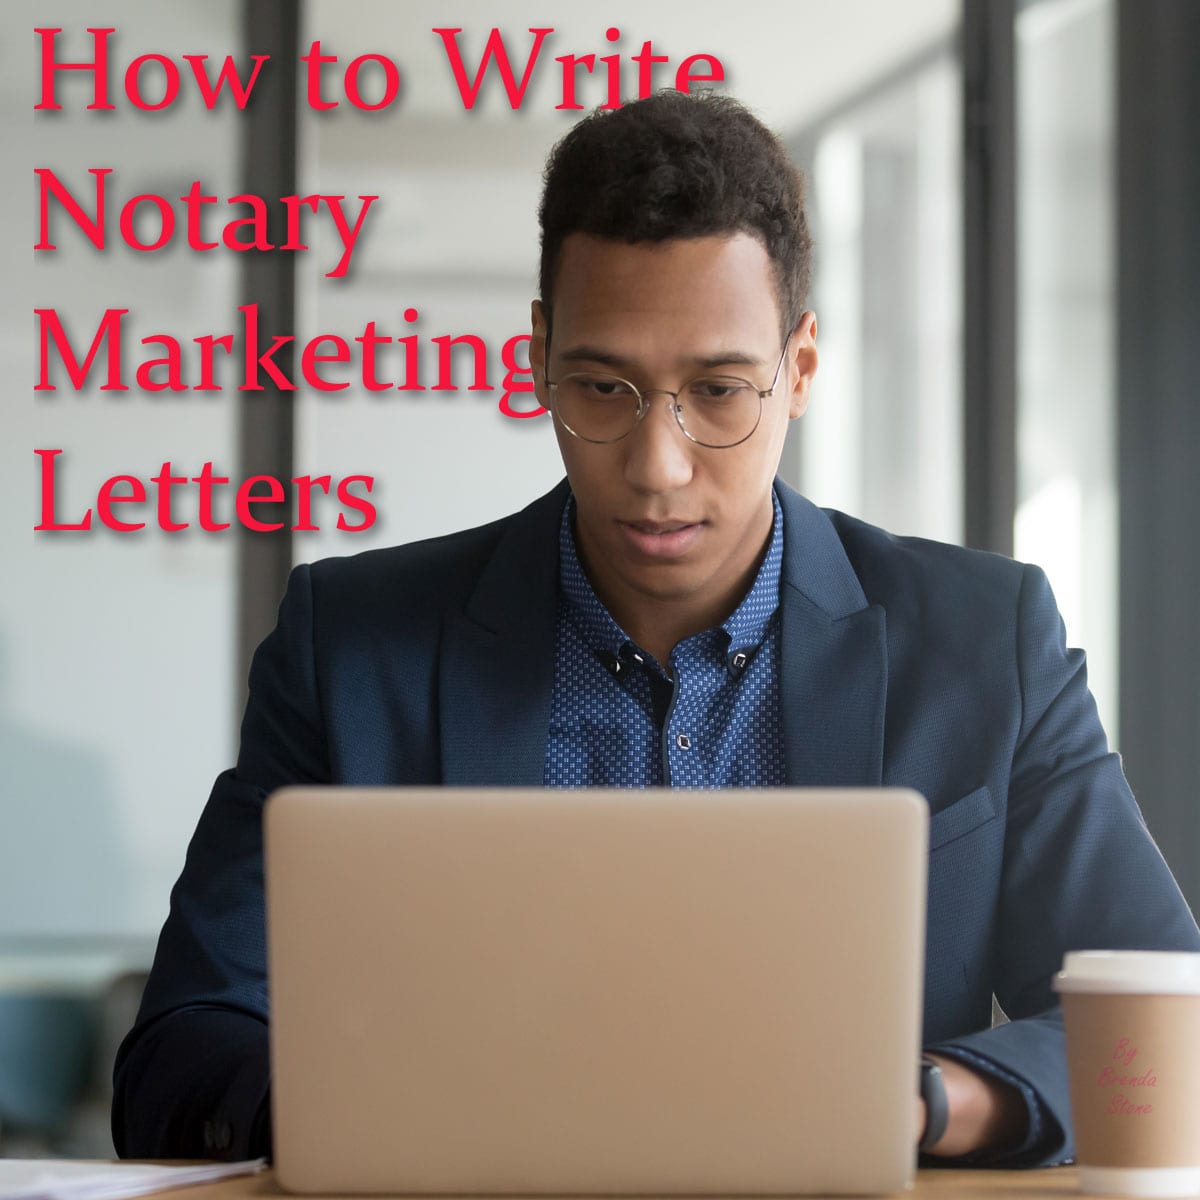 Notary Marketing Letters